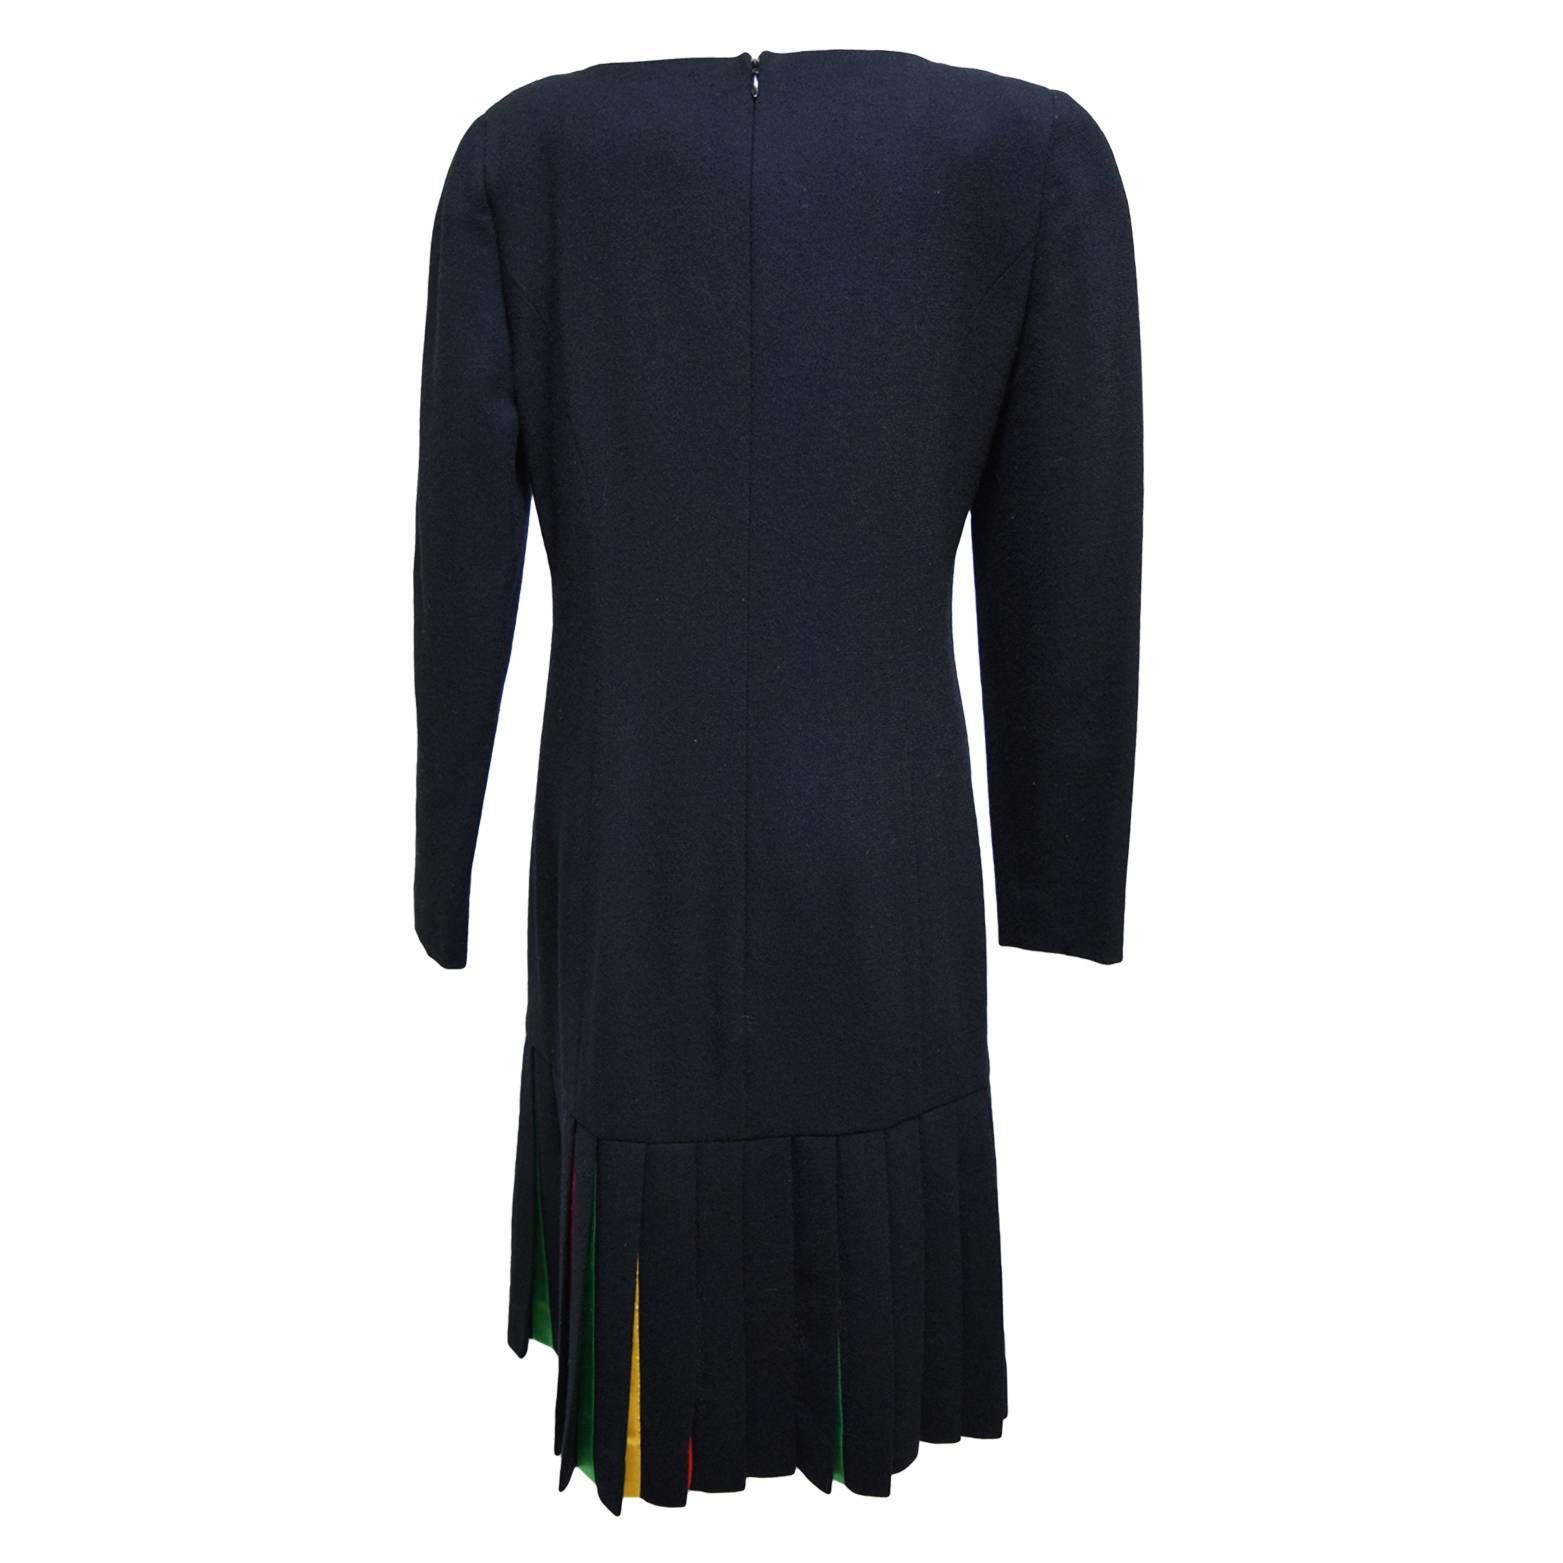 This beautiful vintage piece by Carolina Herrera is made of black wool and is fully lined in silk. The dress is long sleeved with a back zipped closure and the bottom is a colored panel knife pleated skirting.